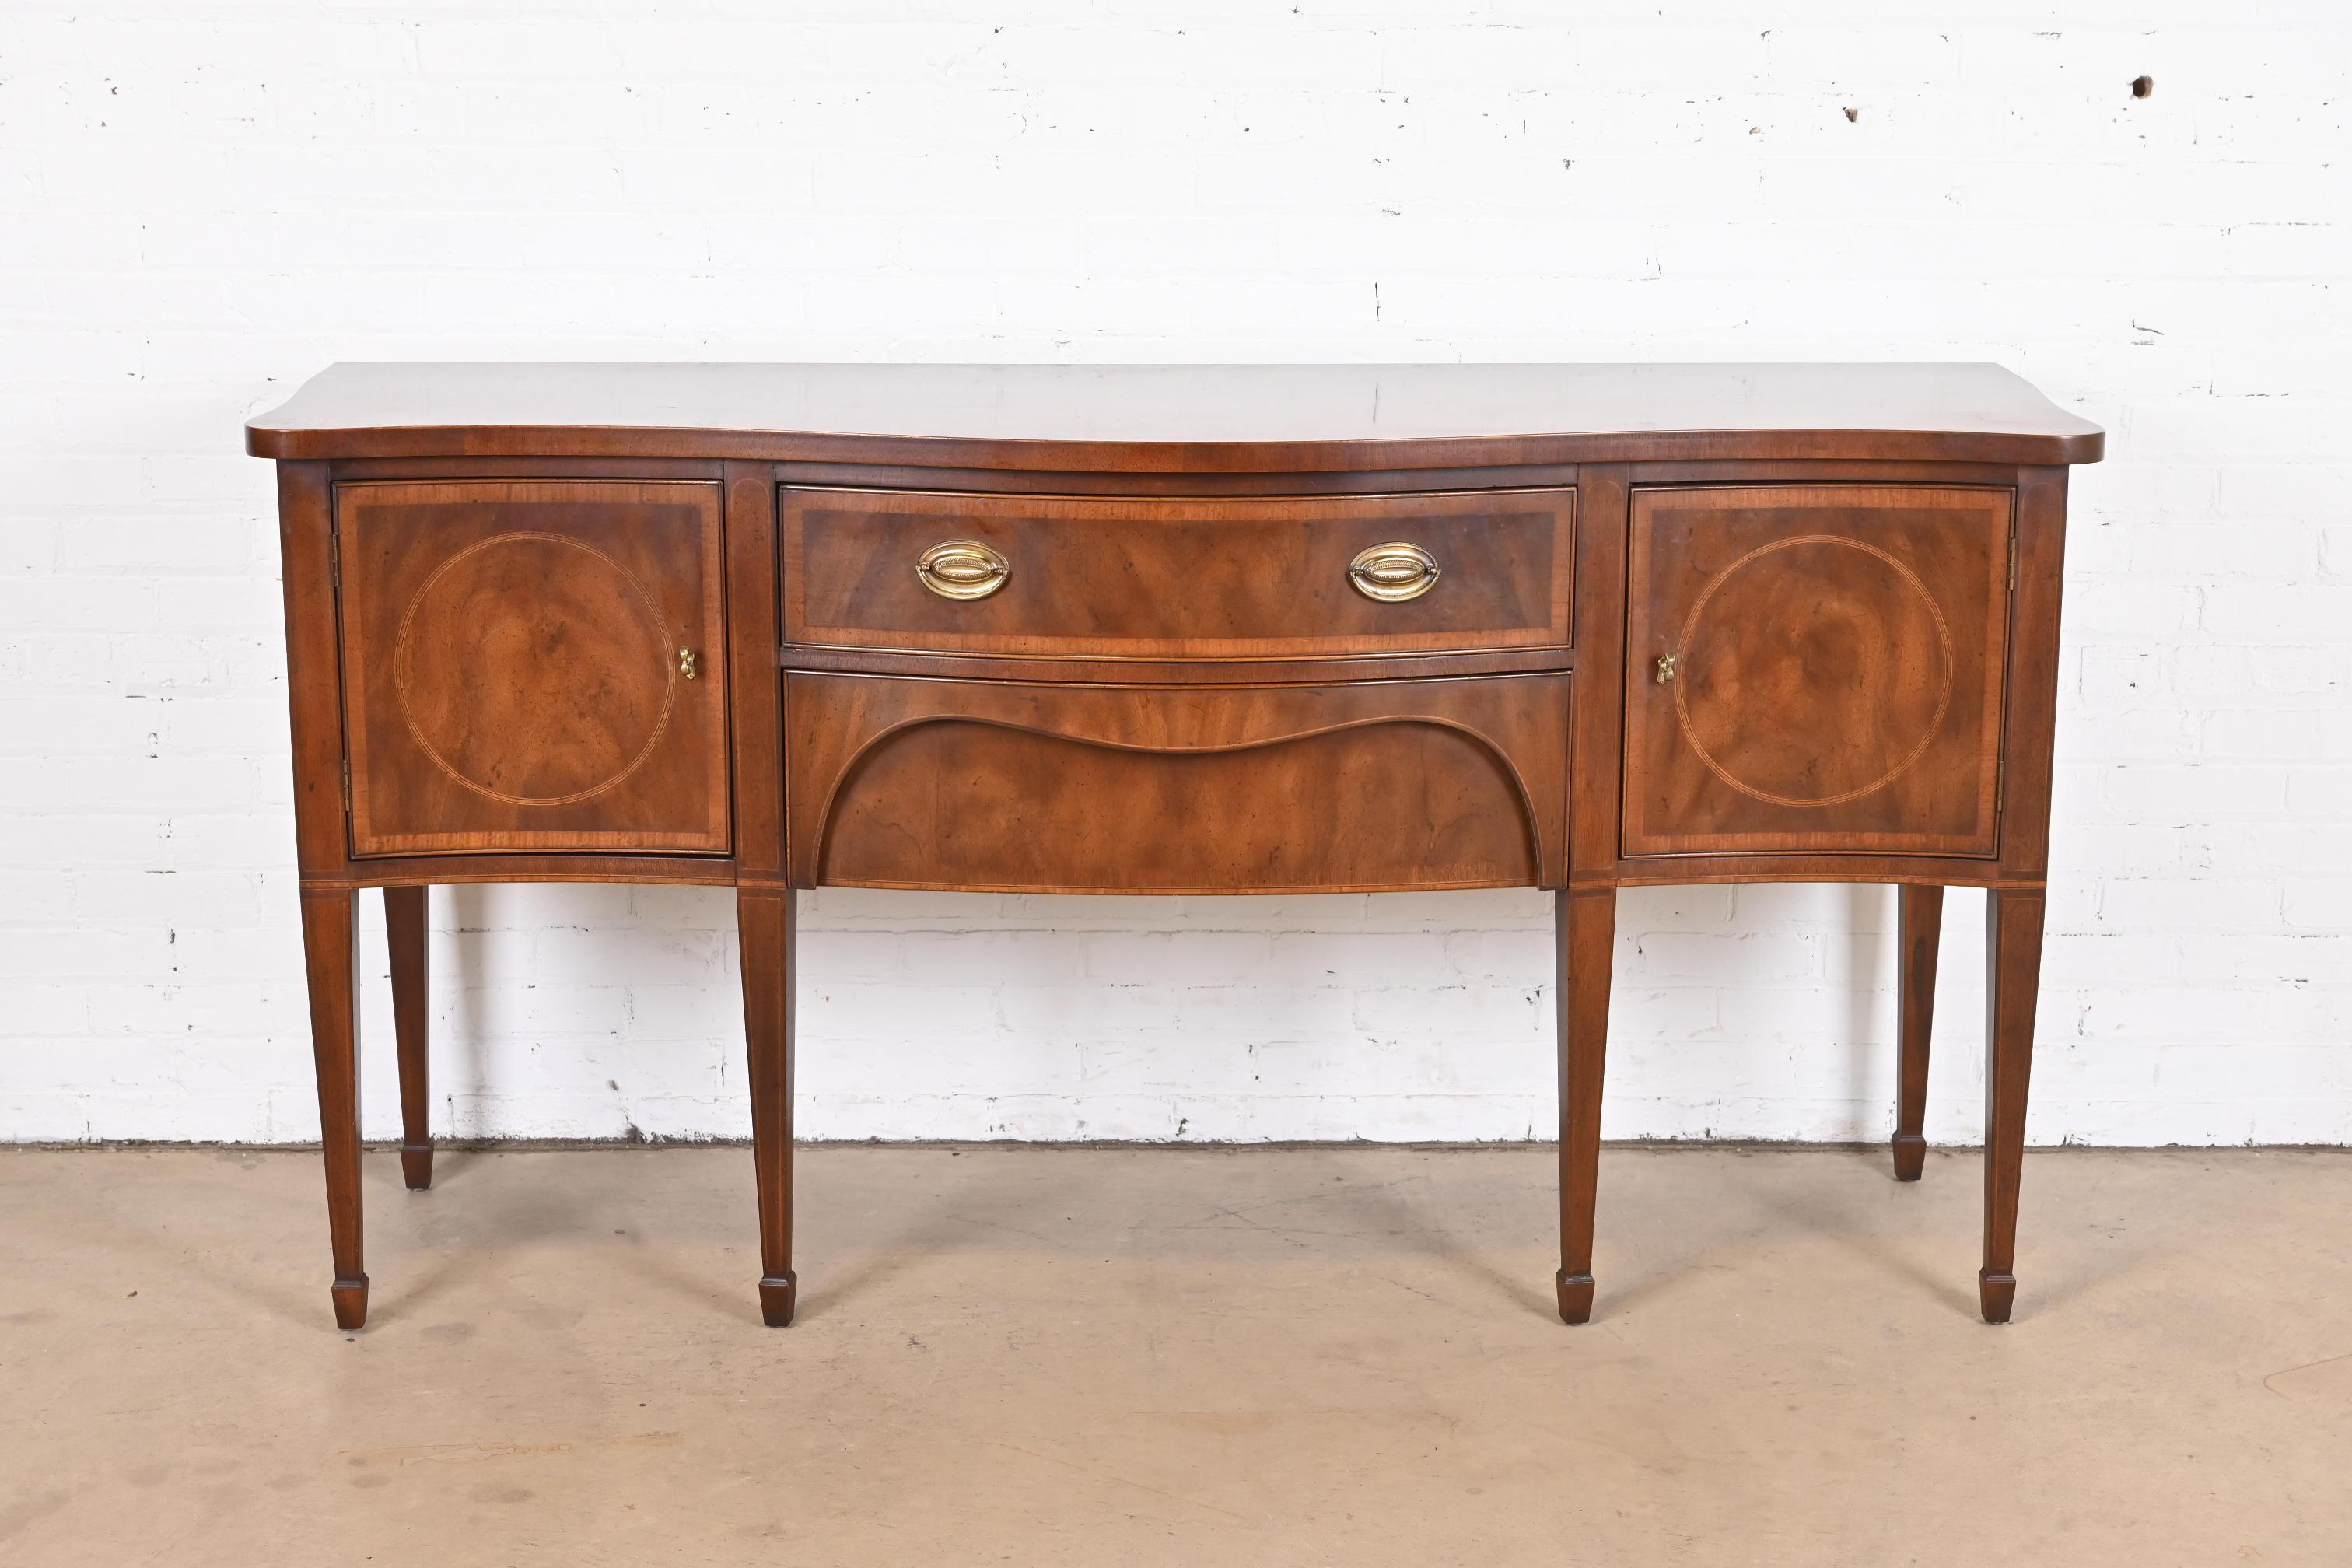 A gorgeous Federal or Hepplewhite style serpentine front sideboard, buffet, or credenza

By Henredon, 